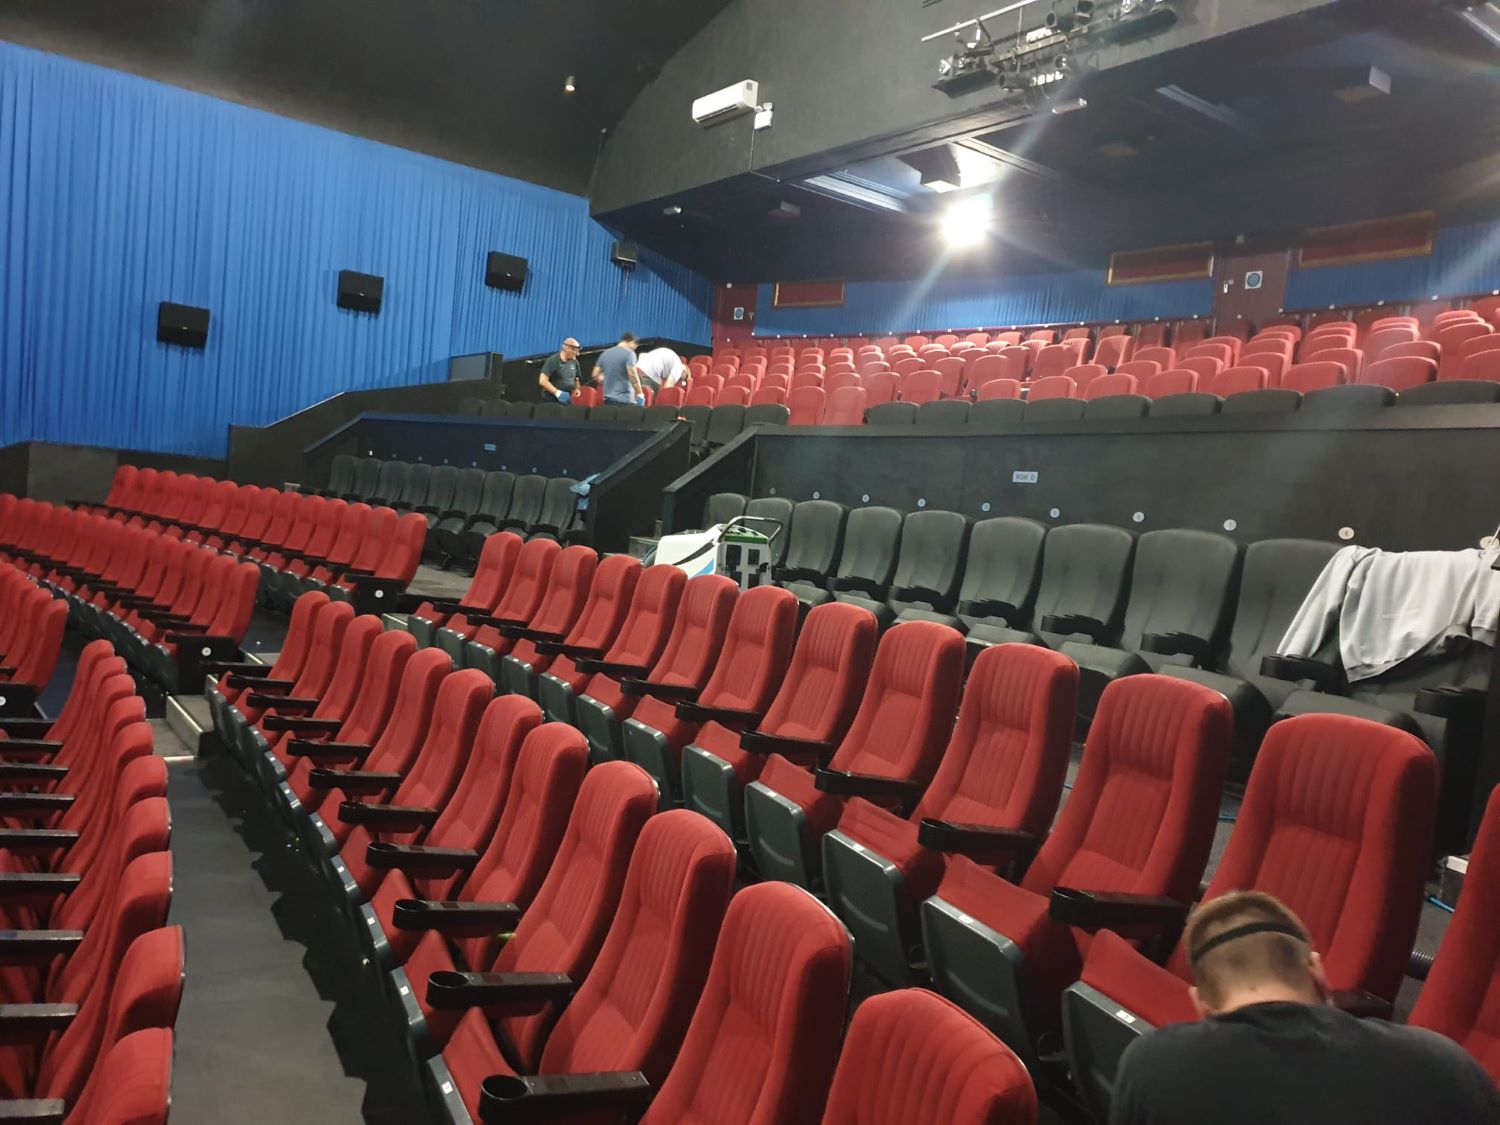 Commercial Upholstery cleaning in cinema